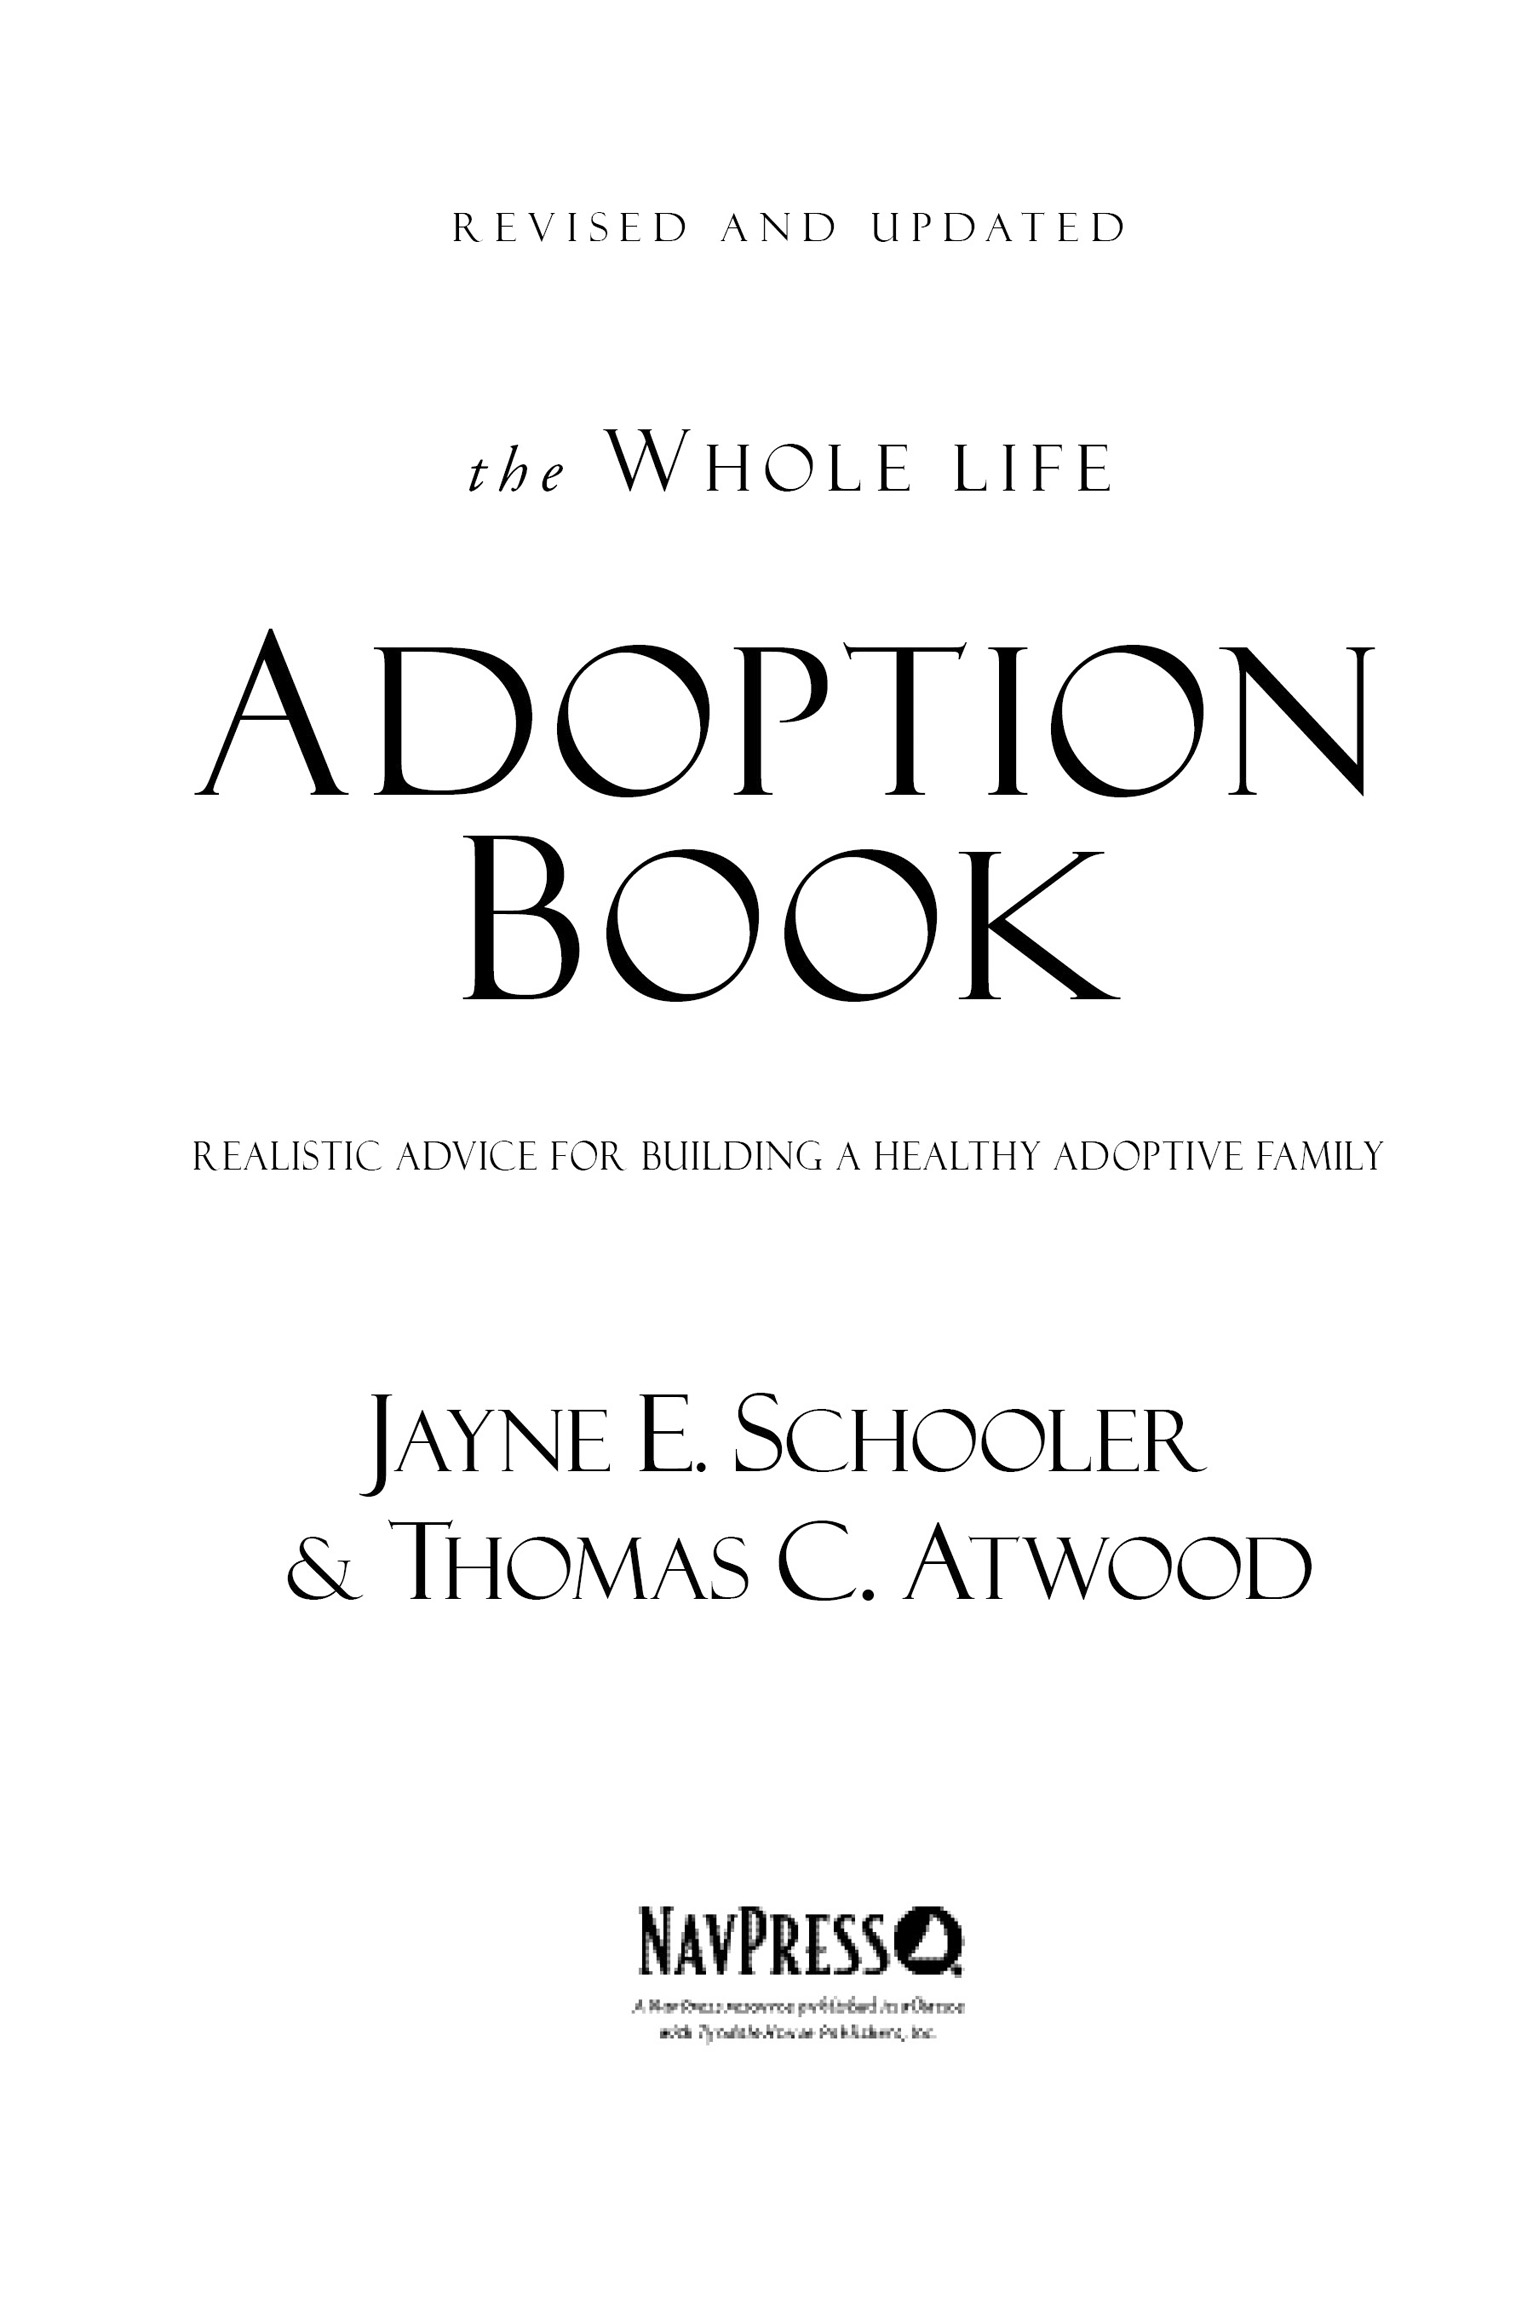 The Whole Life Adoption Book is a comprehensive guide for adoptive parents - photo 2